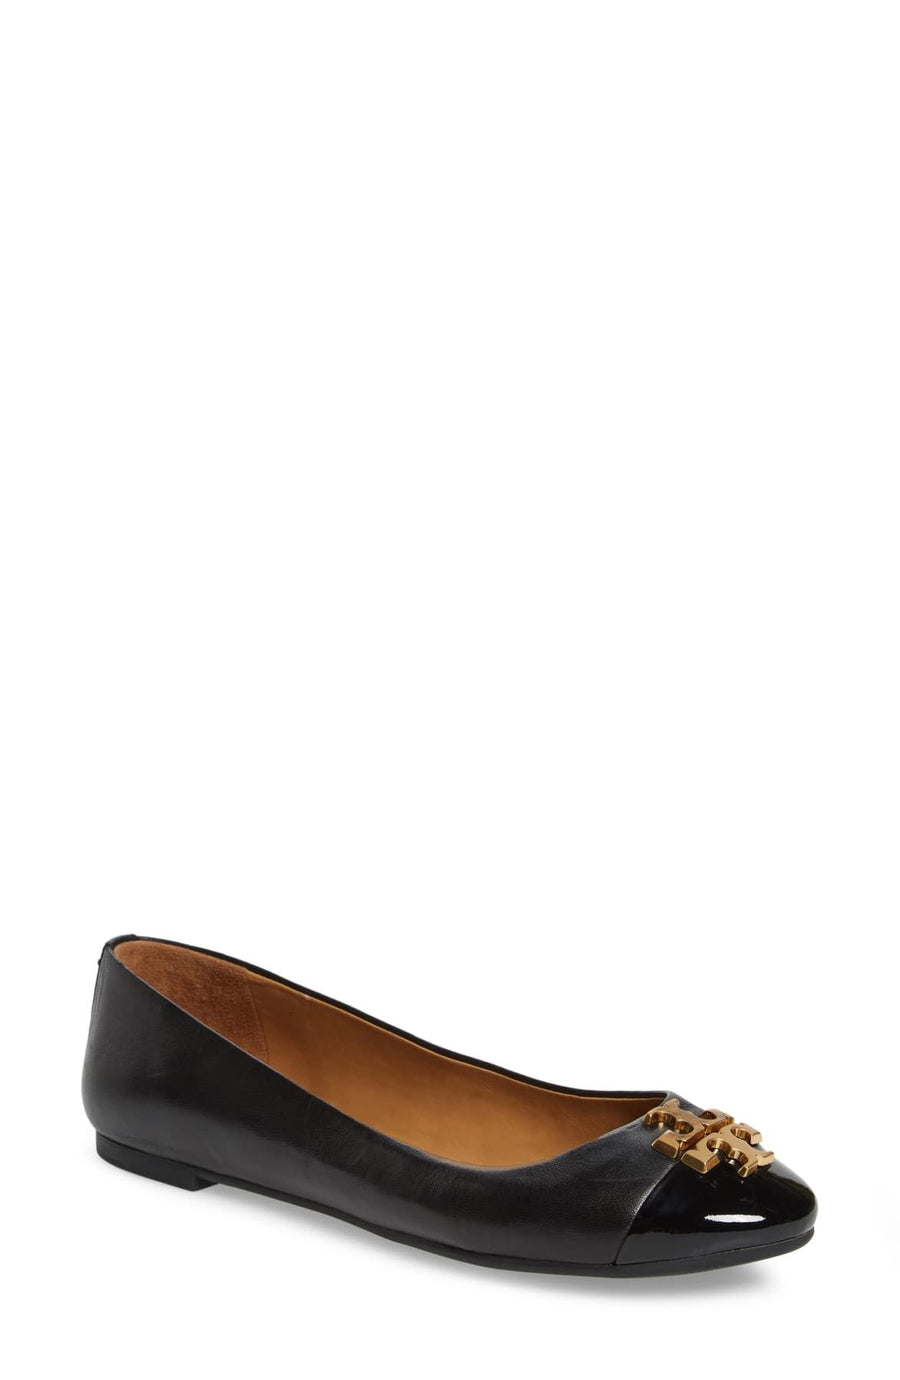 Tory Burch cup toe everly ballet flat